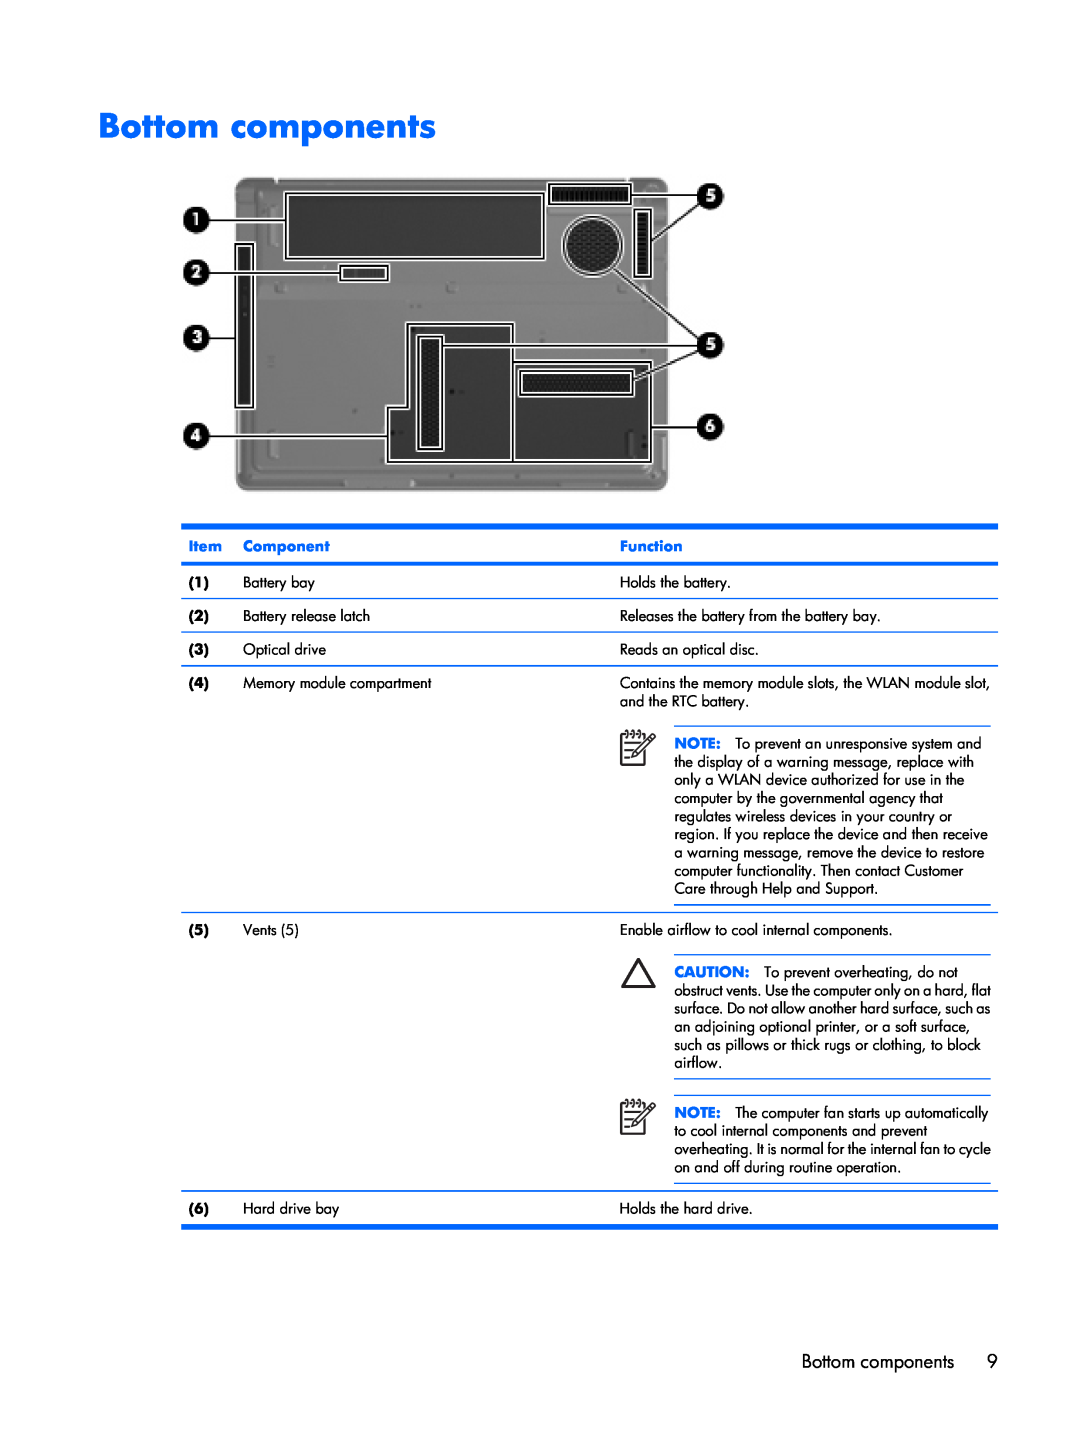 Compaq F500 manual Bottom components, Component, Function, Contains the memory module slots, the WLAN module slot 